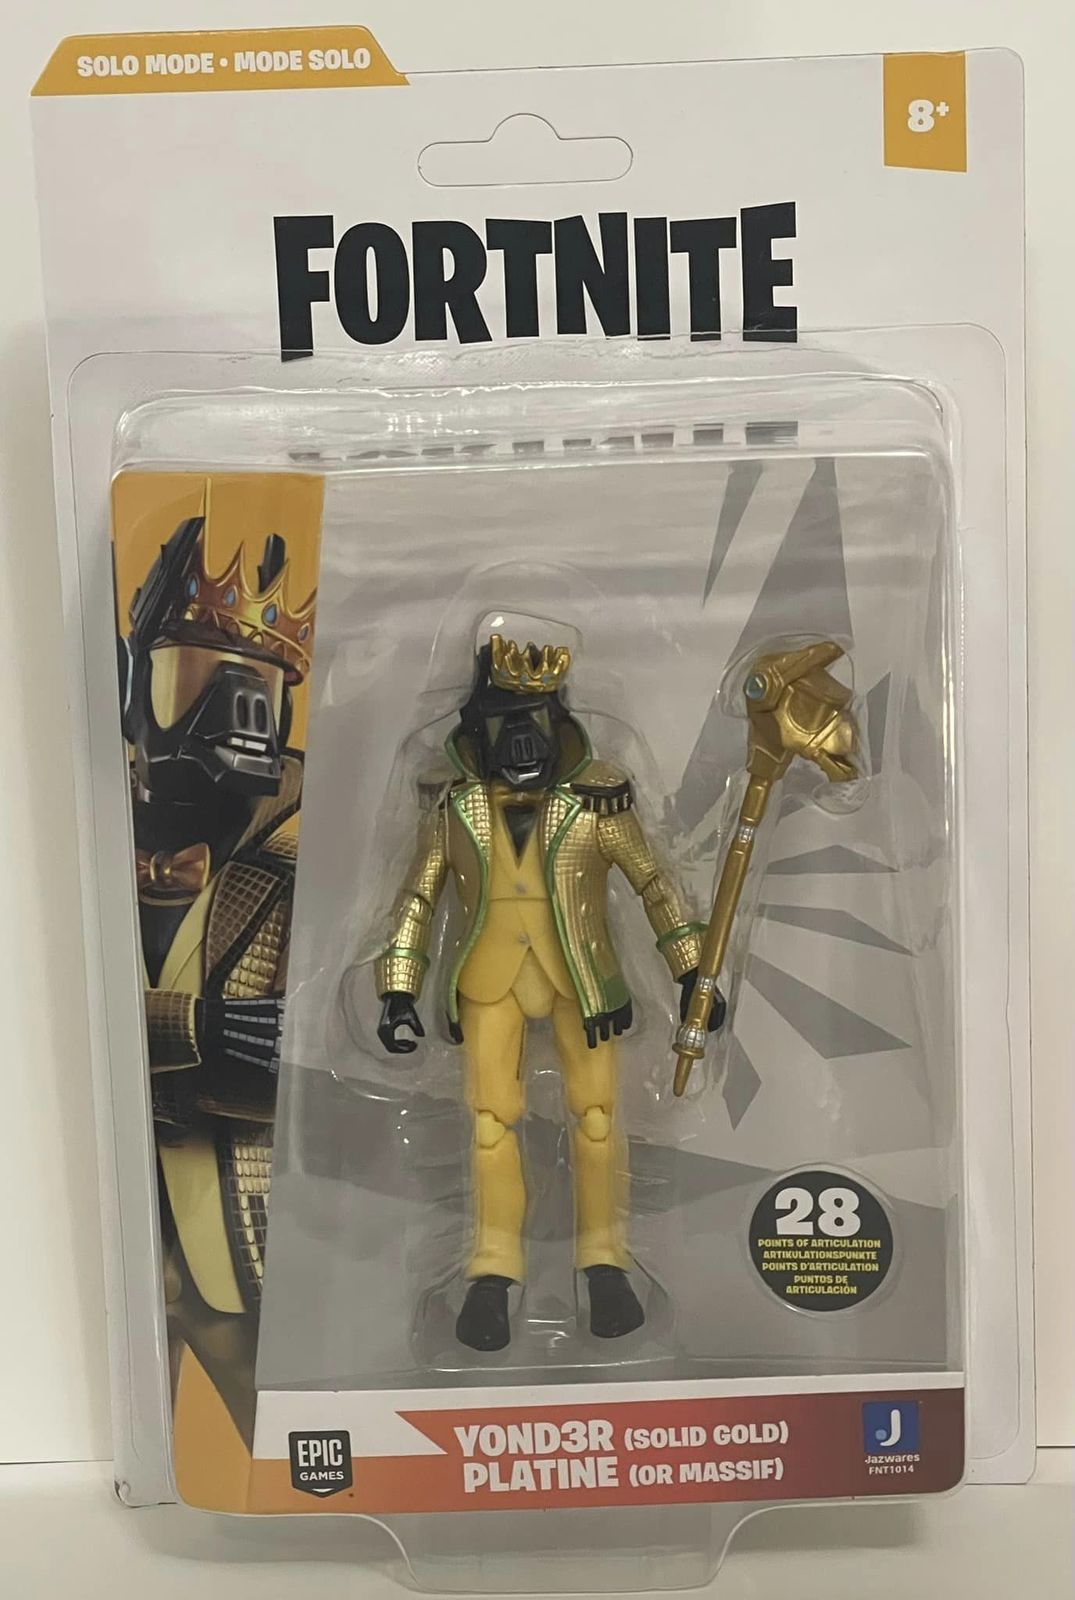 Primary image for FORTNITE - YOND3R (SOLID GOLD) (New)